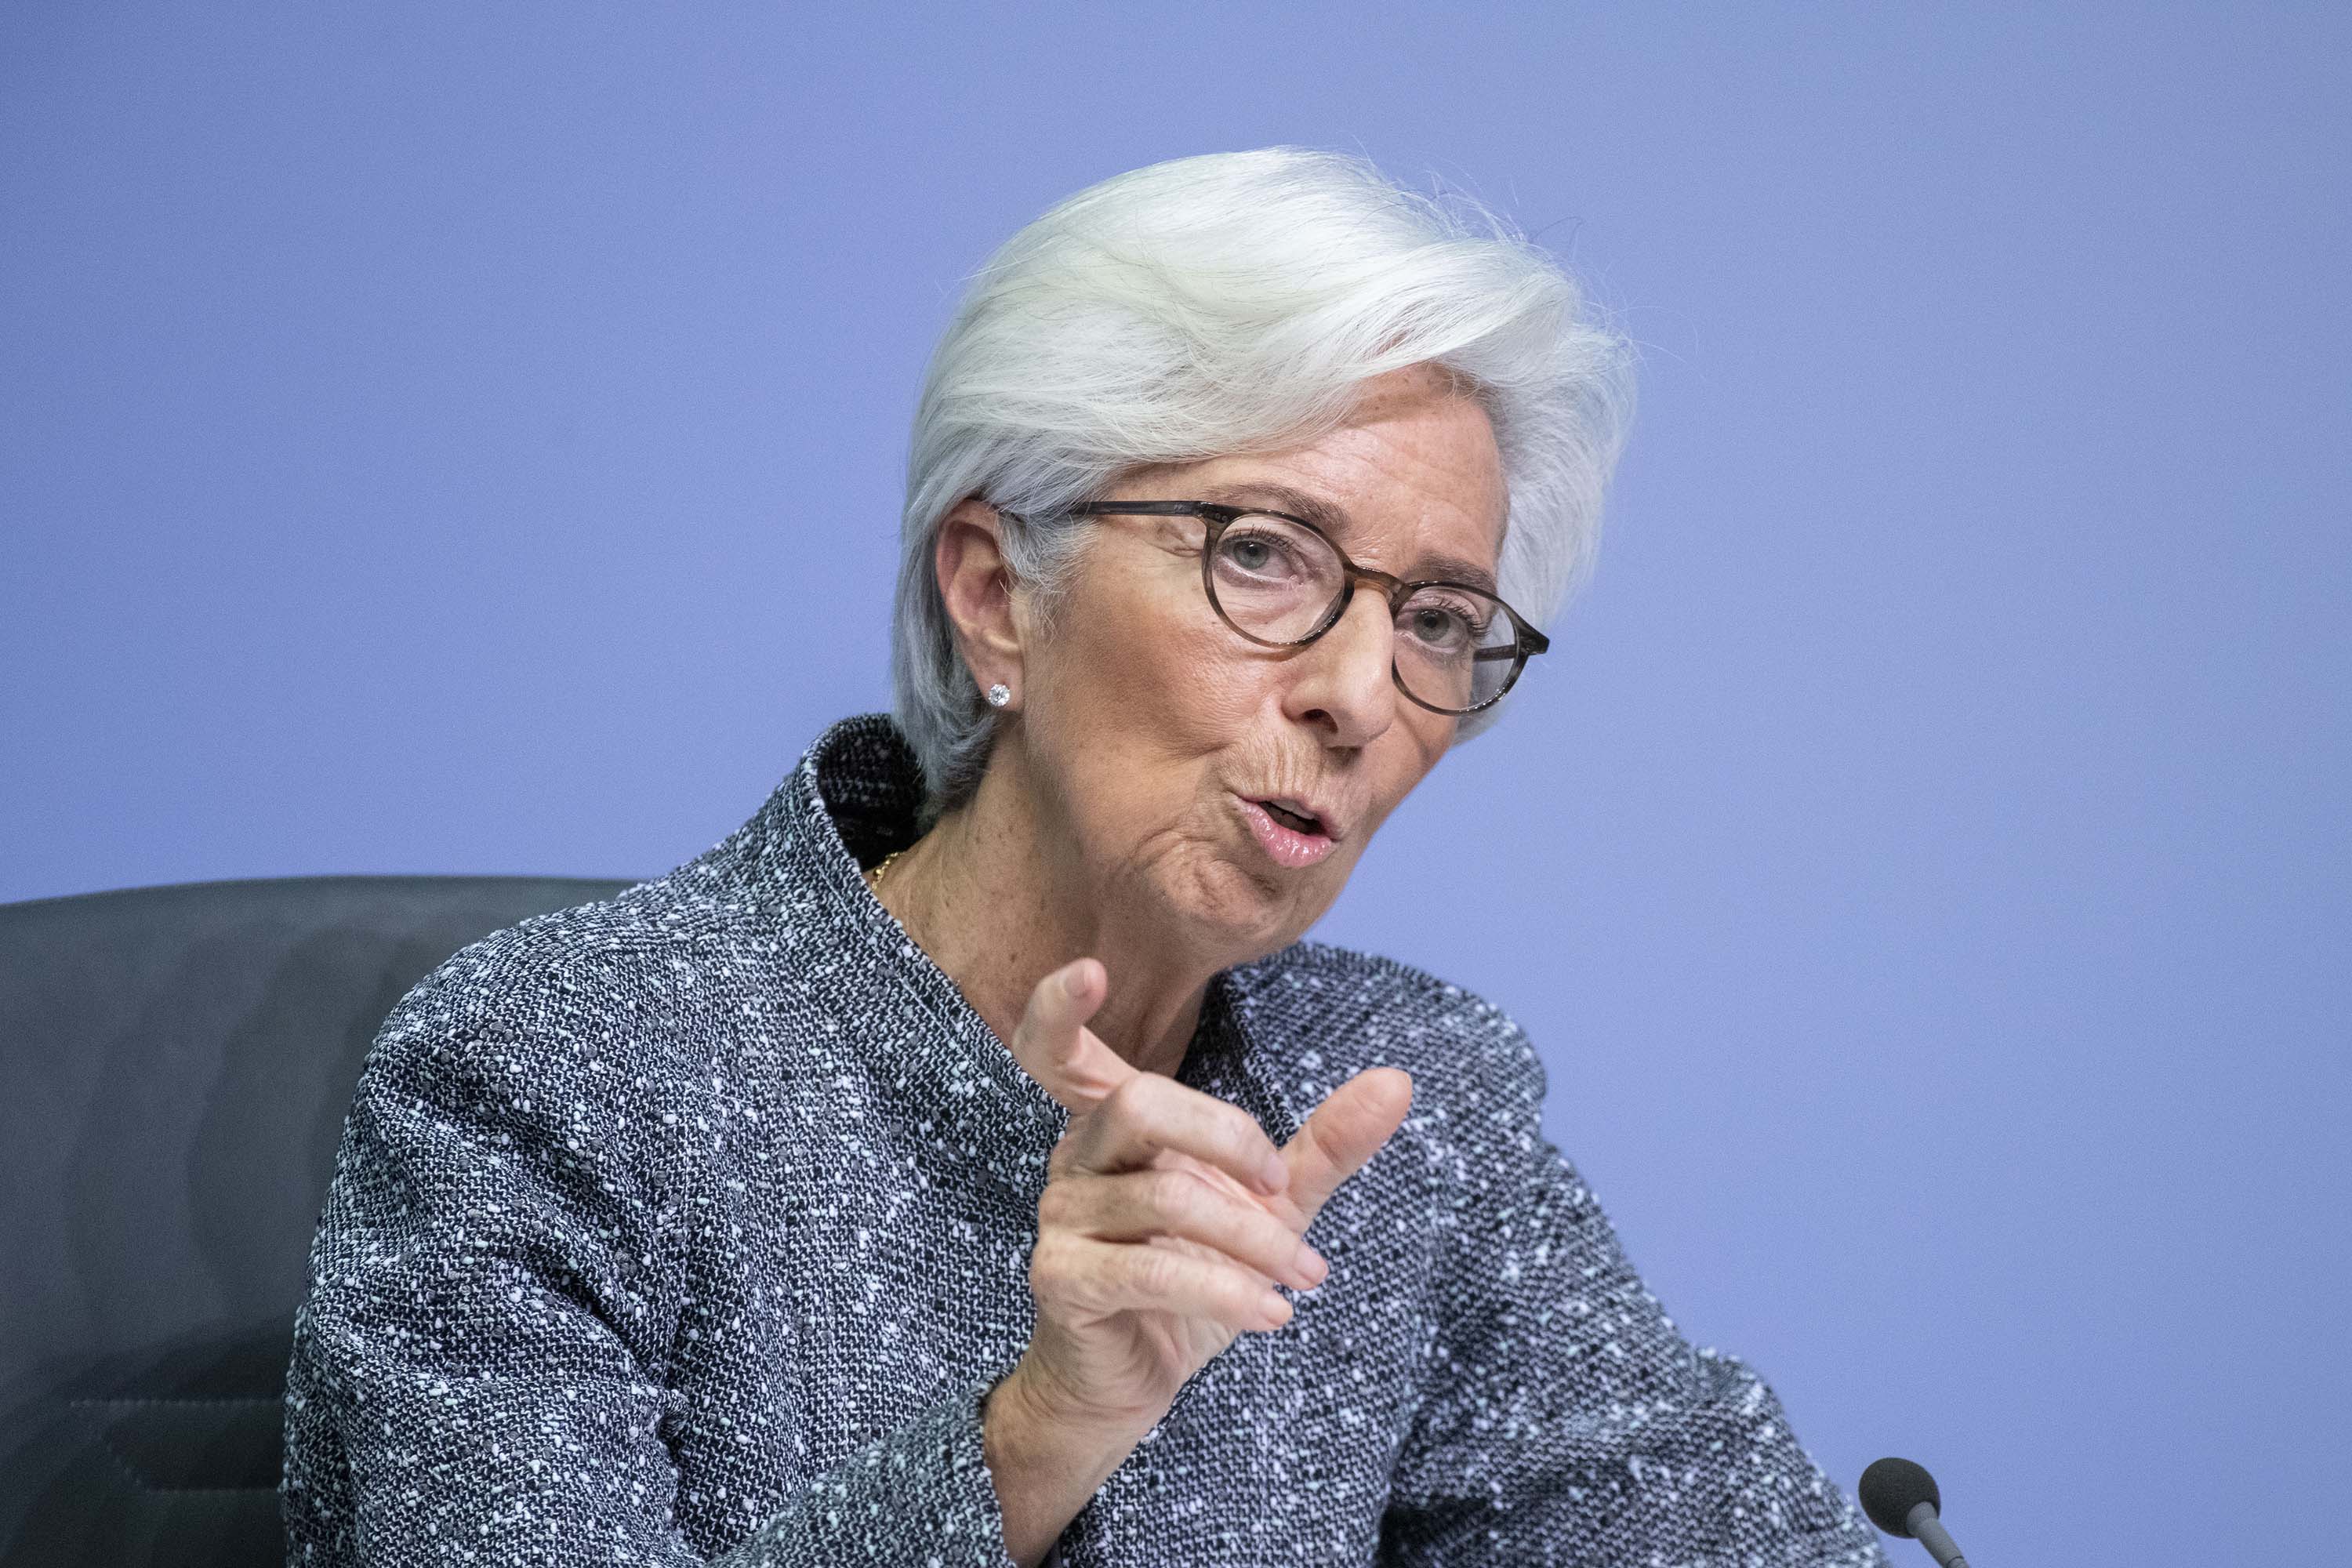 Christine Lagarde, President of the European Central Bank (ECB), speaks to the media at the ECB headquarters in Frankfurt, Germany, in March.